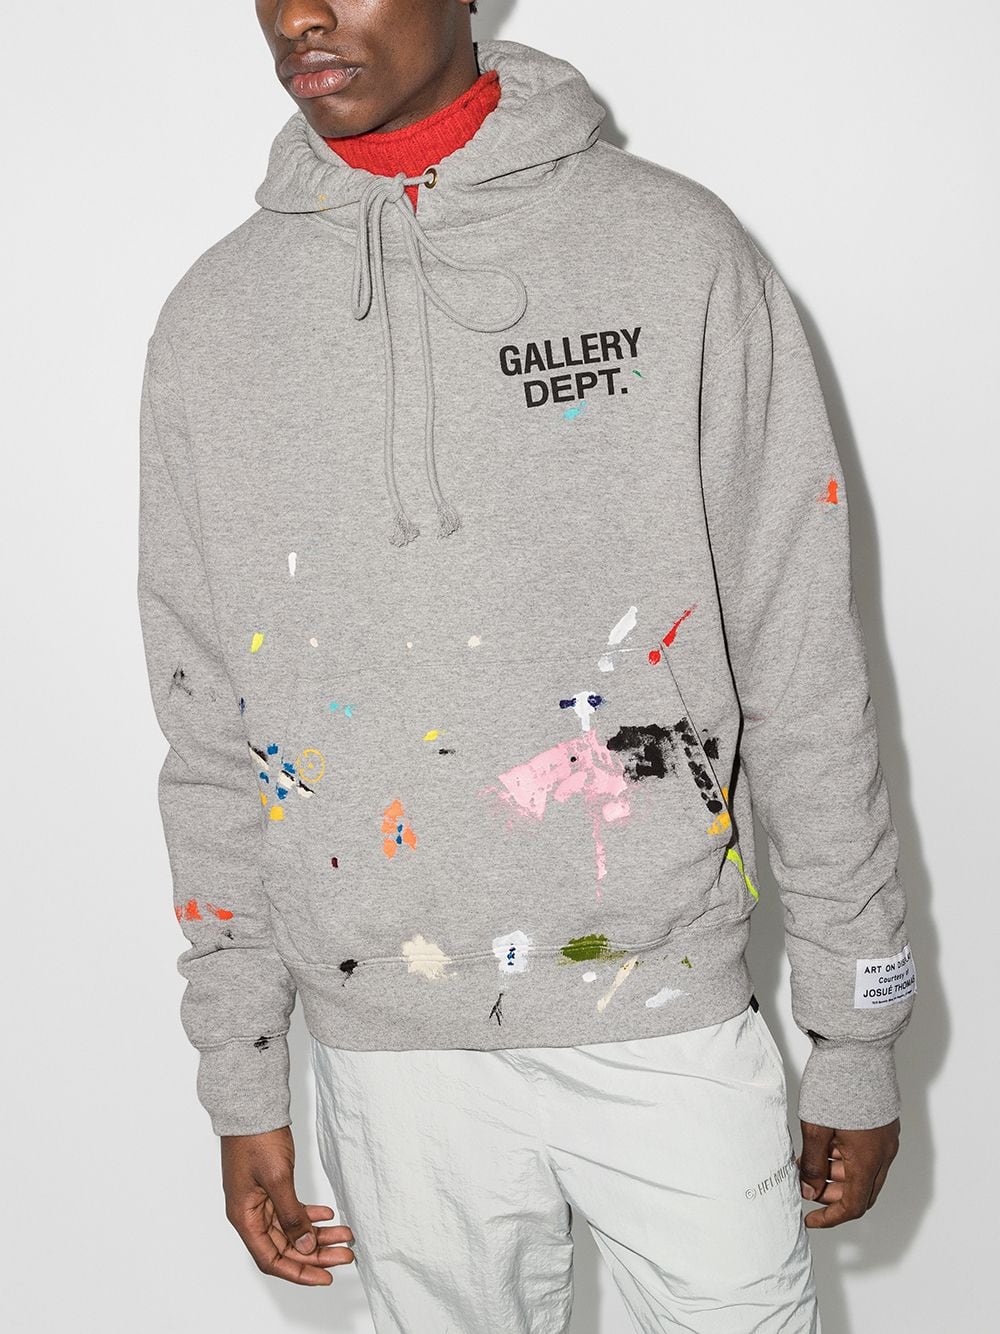 The Evolution of the Gallery Dept Hoodie: From Humble Origins to Iconic Streetwear插图